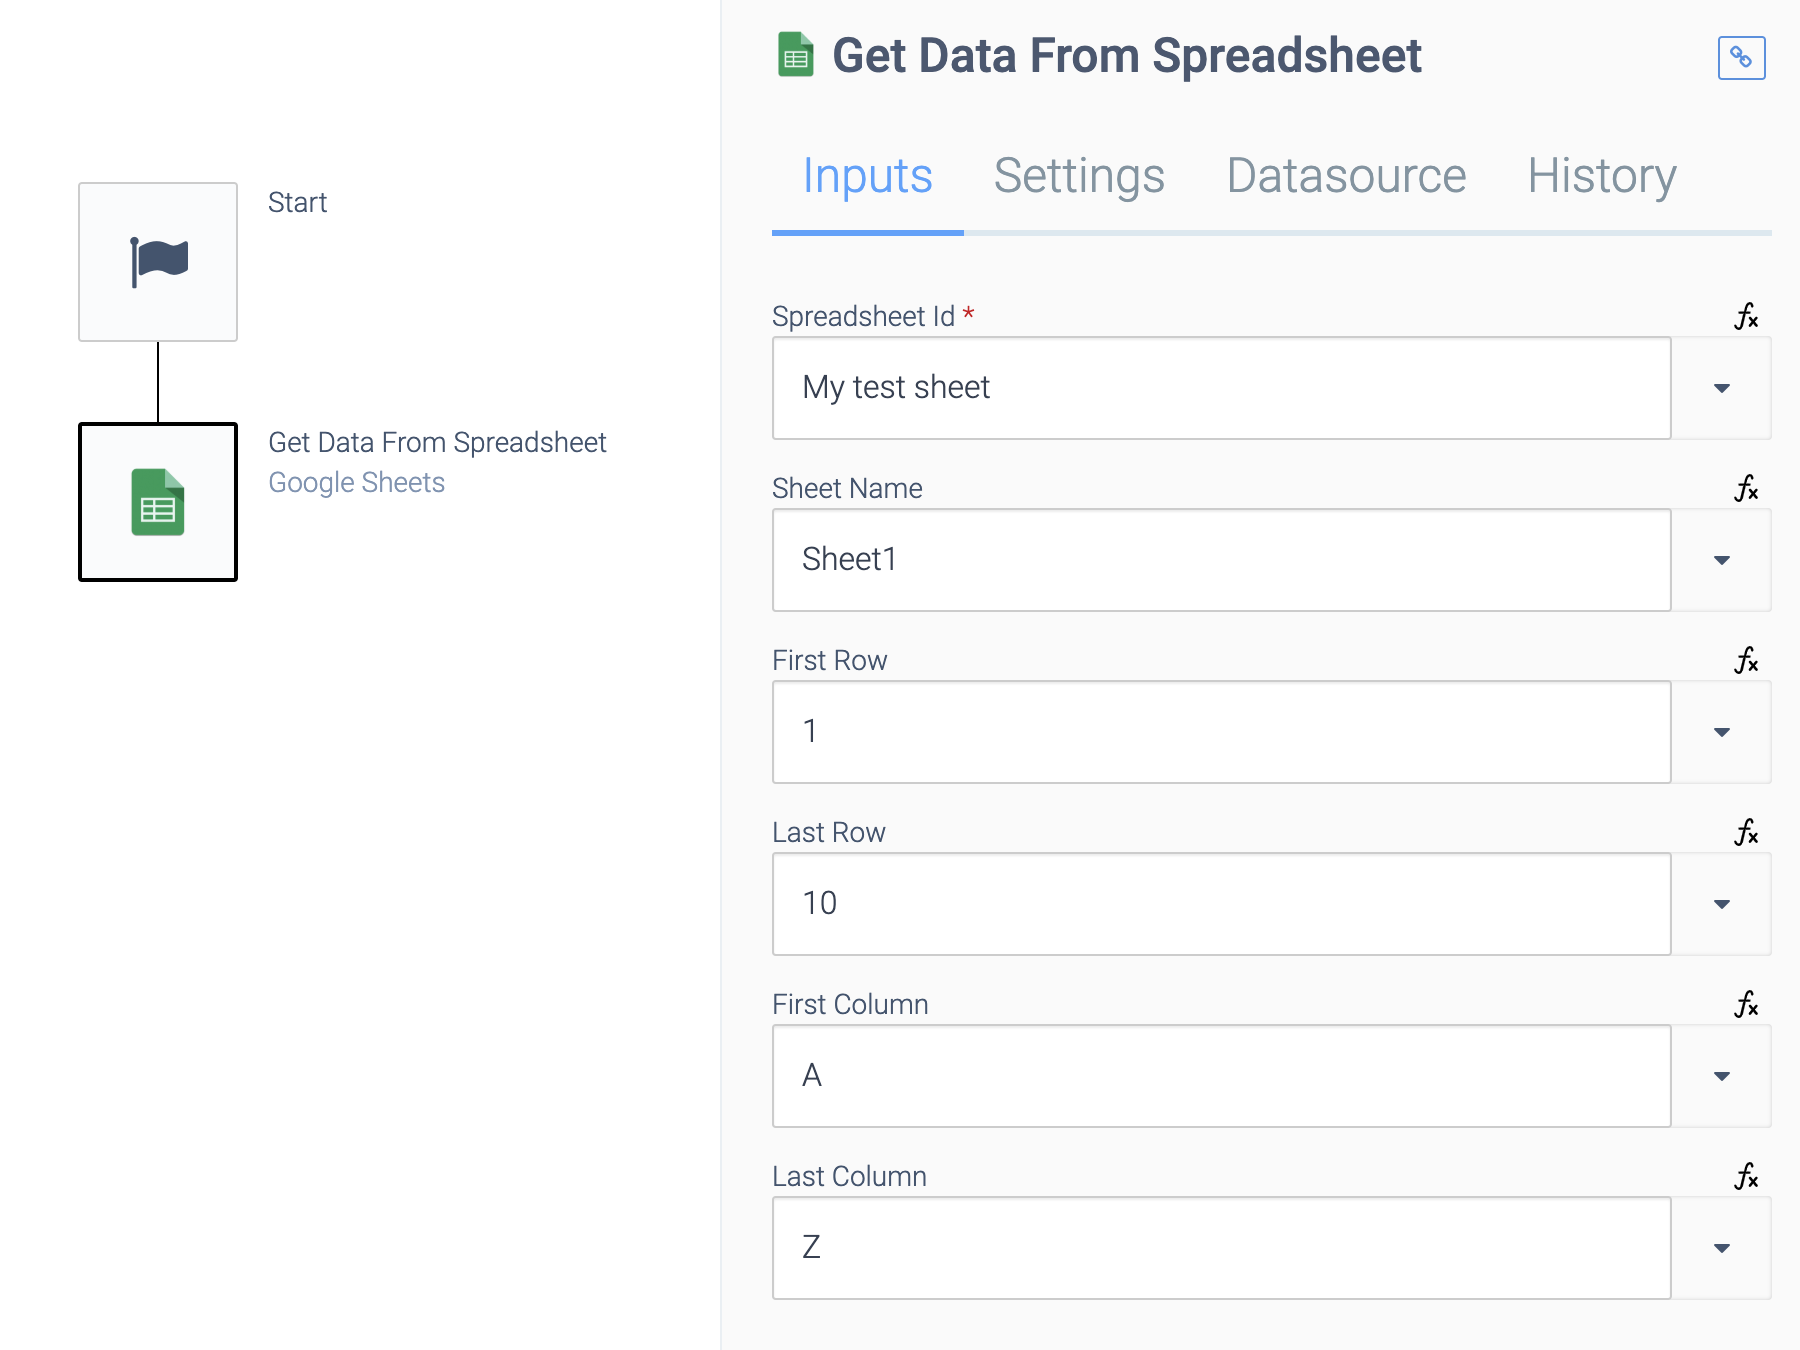 The Get Data From Spreadsheet block. Its Input tab contains fields for the Spreadsheet Id, Sheet Name, and the first and last rows and columns to be accessed.